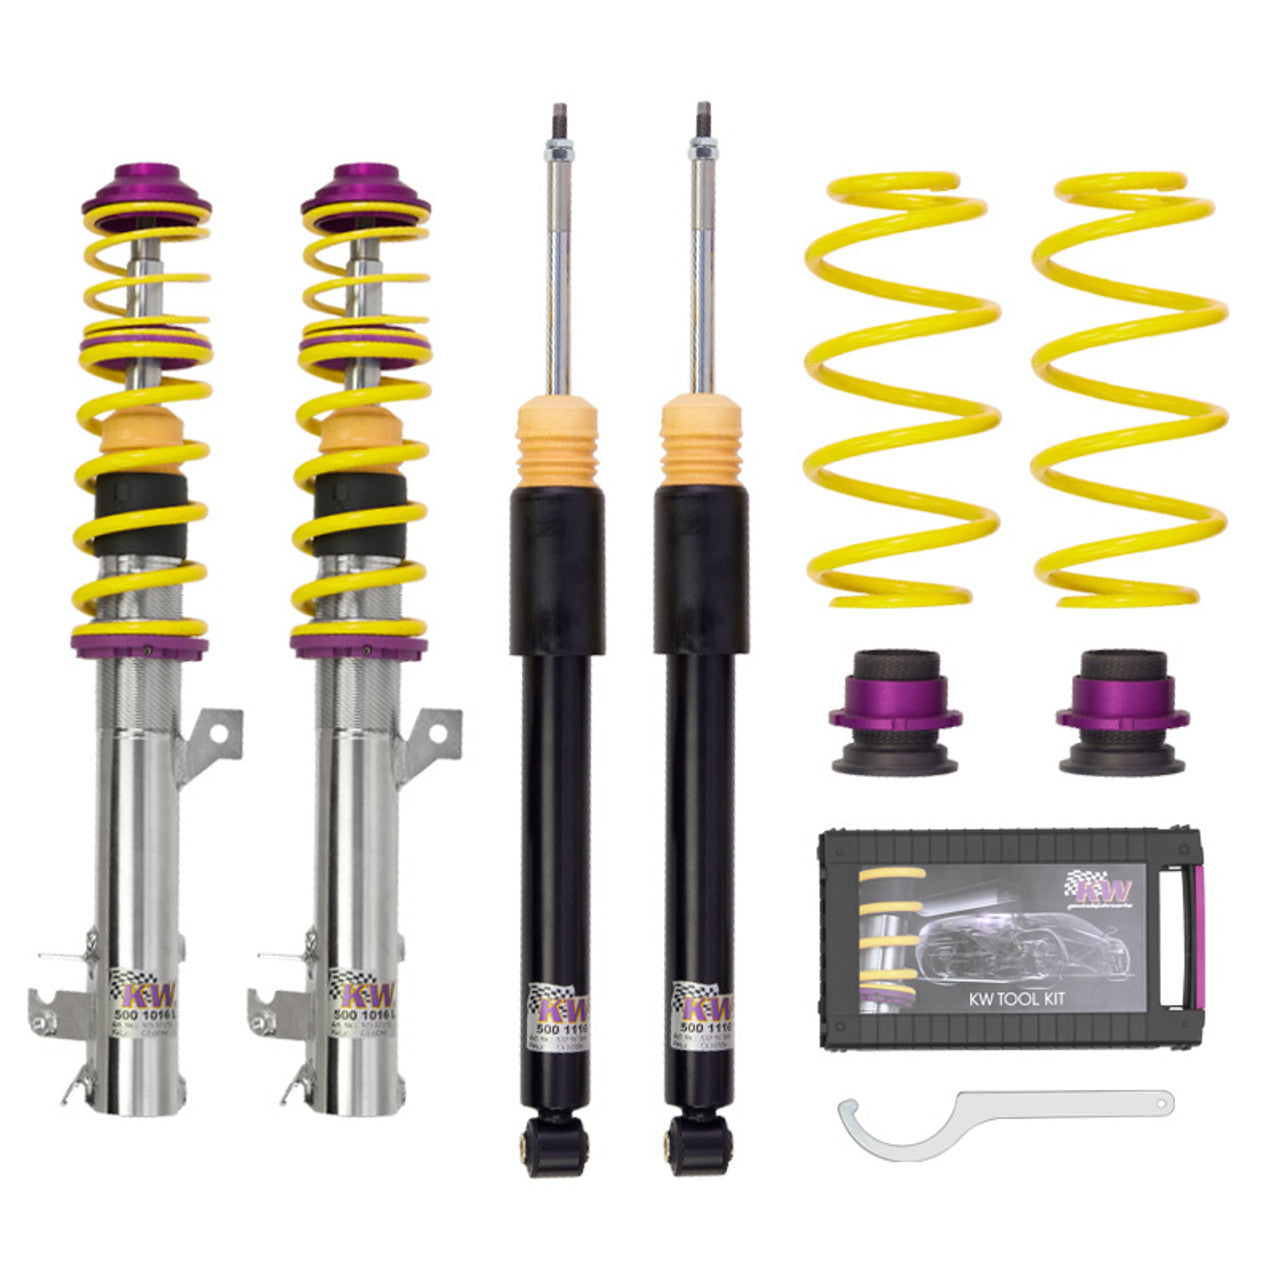 KW Variant 1 Coilovers - Tiguan Mk2 with electronic dampers